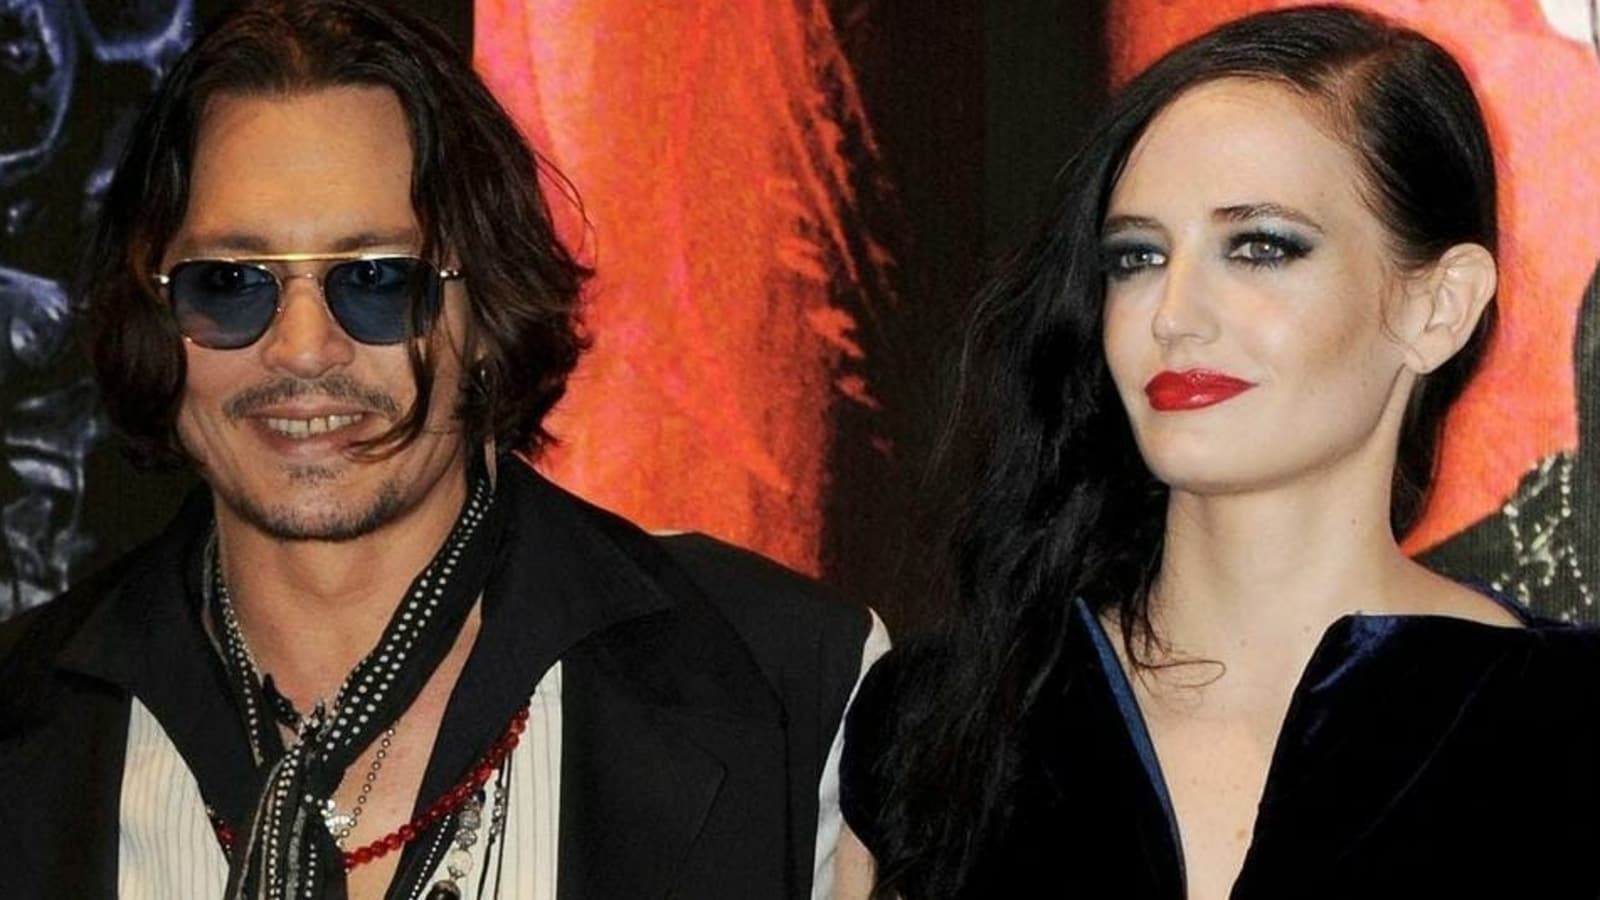 Eva Green says Johnny Depp will emerge from Amber Heard trial ‘with his wonderful heart revealed to the world’